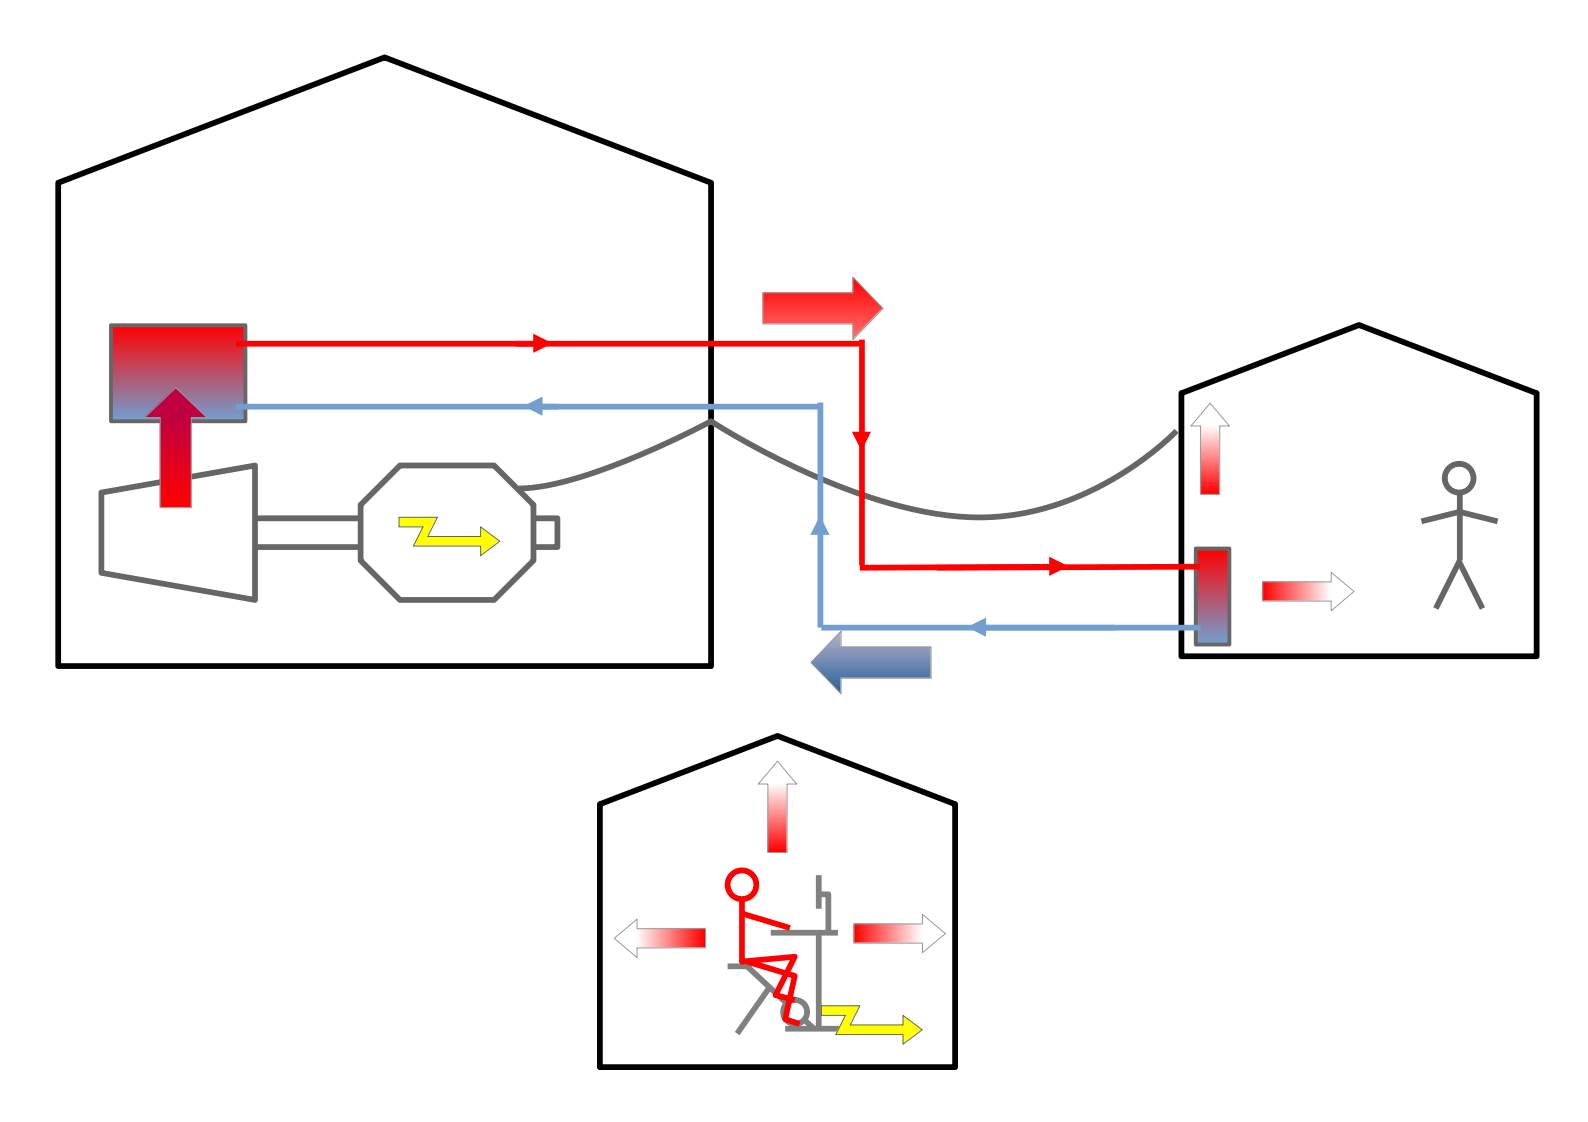 Schematic diagram of conventional cogeneration above that of human cogeneration.  The conventional cogeneration diagram shows the power plant as a larger building and a home as a small building.  They are joined by a wire and hot and cold water pipes which is connected to a radiator in the home.  Heat given off from the radiator is depicted as red arrows.  The human cogeneration diagram shows a stick figure sitting at a computer desk pedaling a generator.  Electricity from the generator is depicted as a lightning bolt, and heat given off from his body as red arrows.